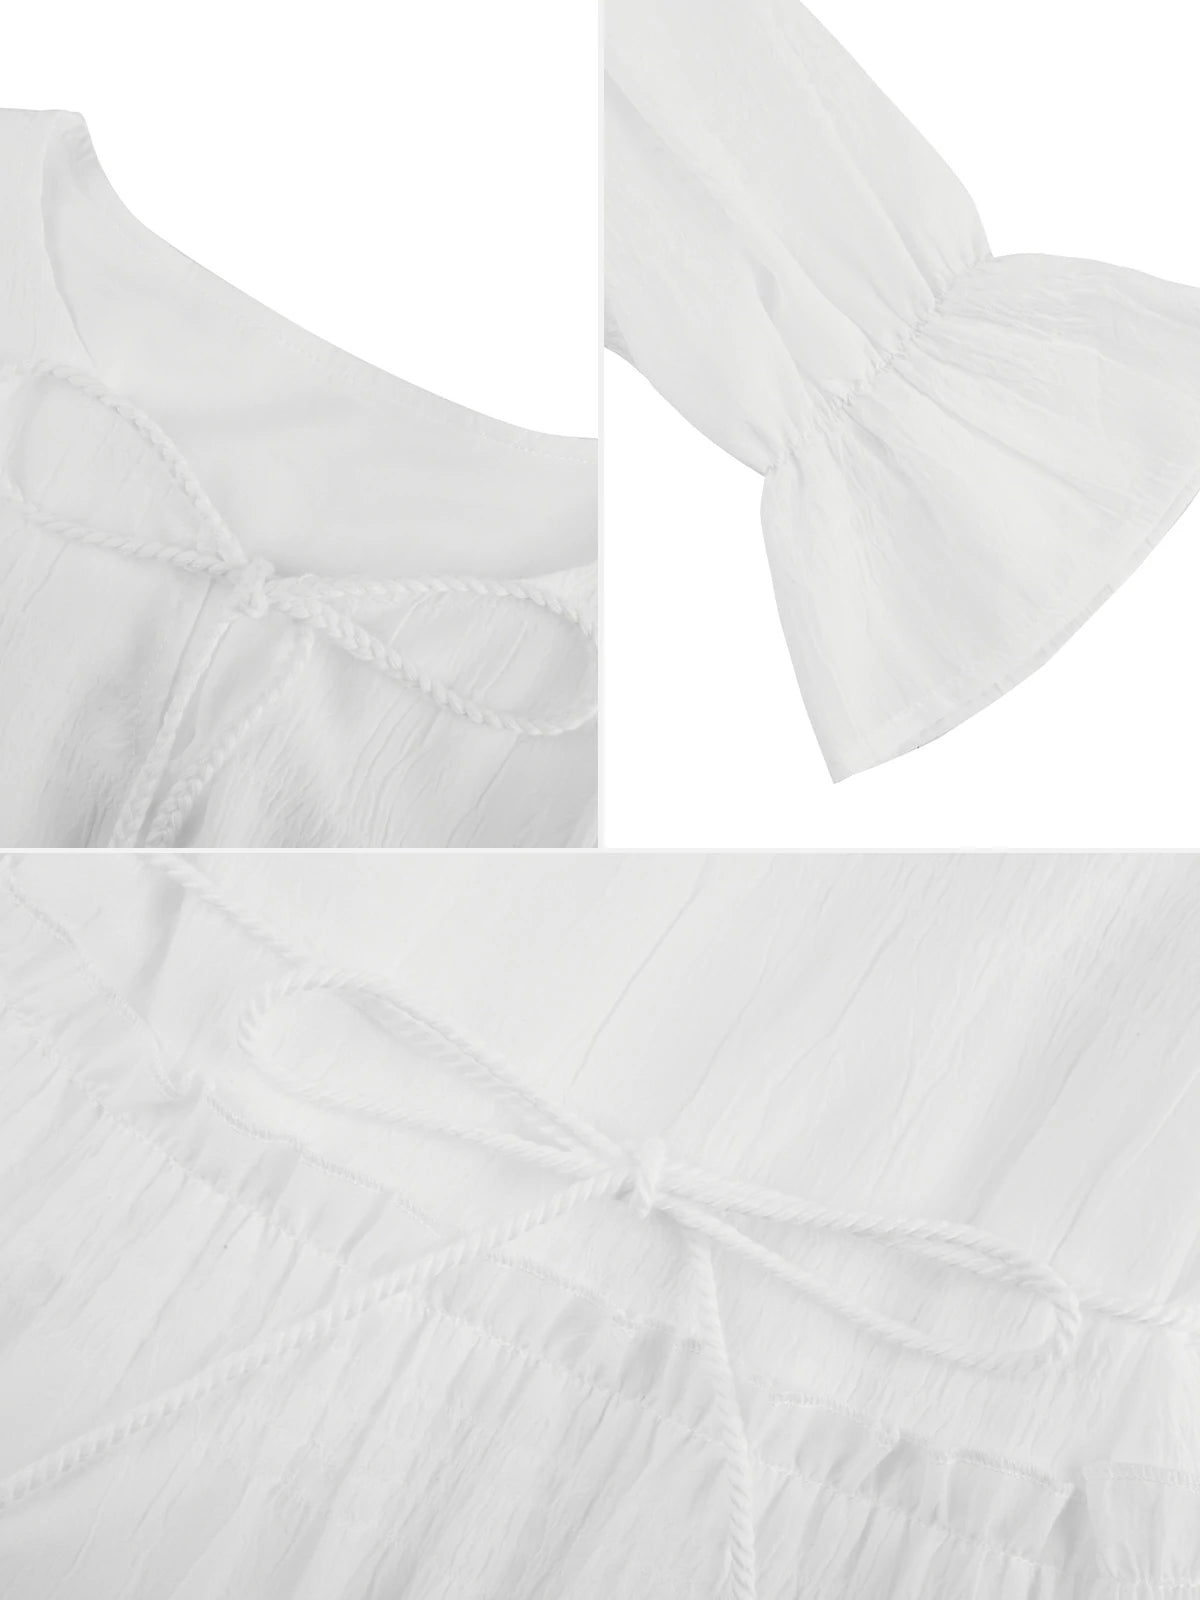 Fashionable mid-length dress in a fresh white hue, showcasing neckline and waist tie details, and ruffle edges, offering a versatile and stylish outfit choice.